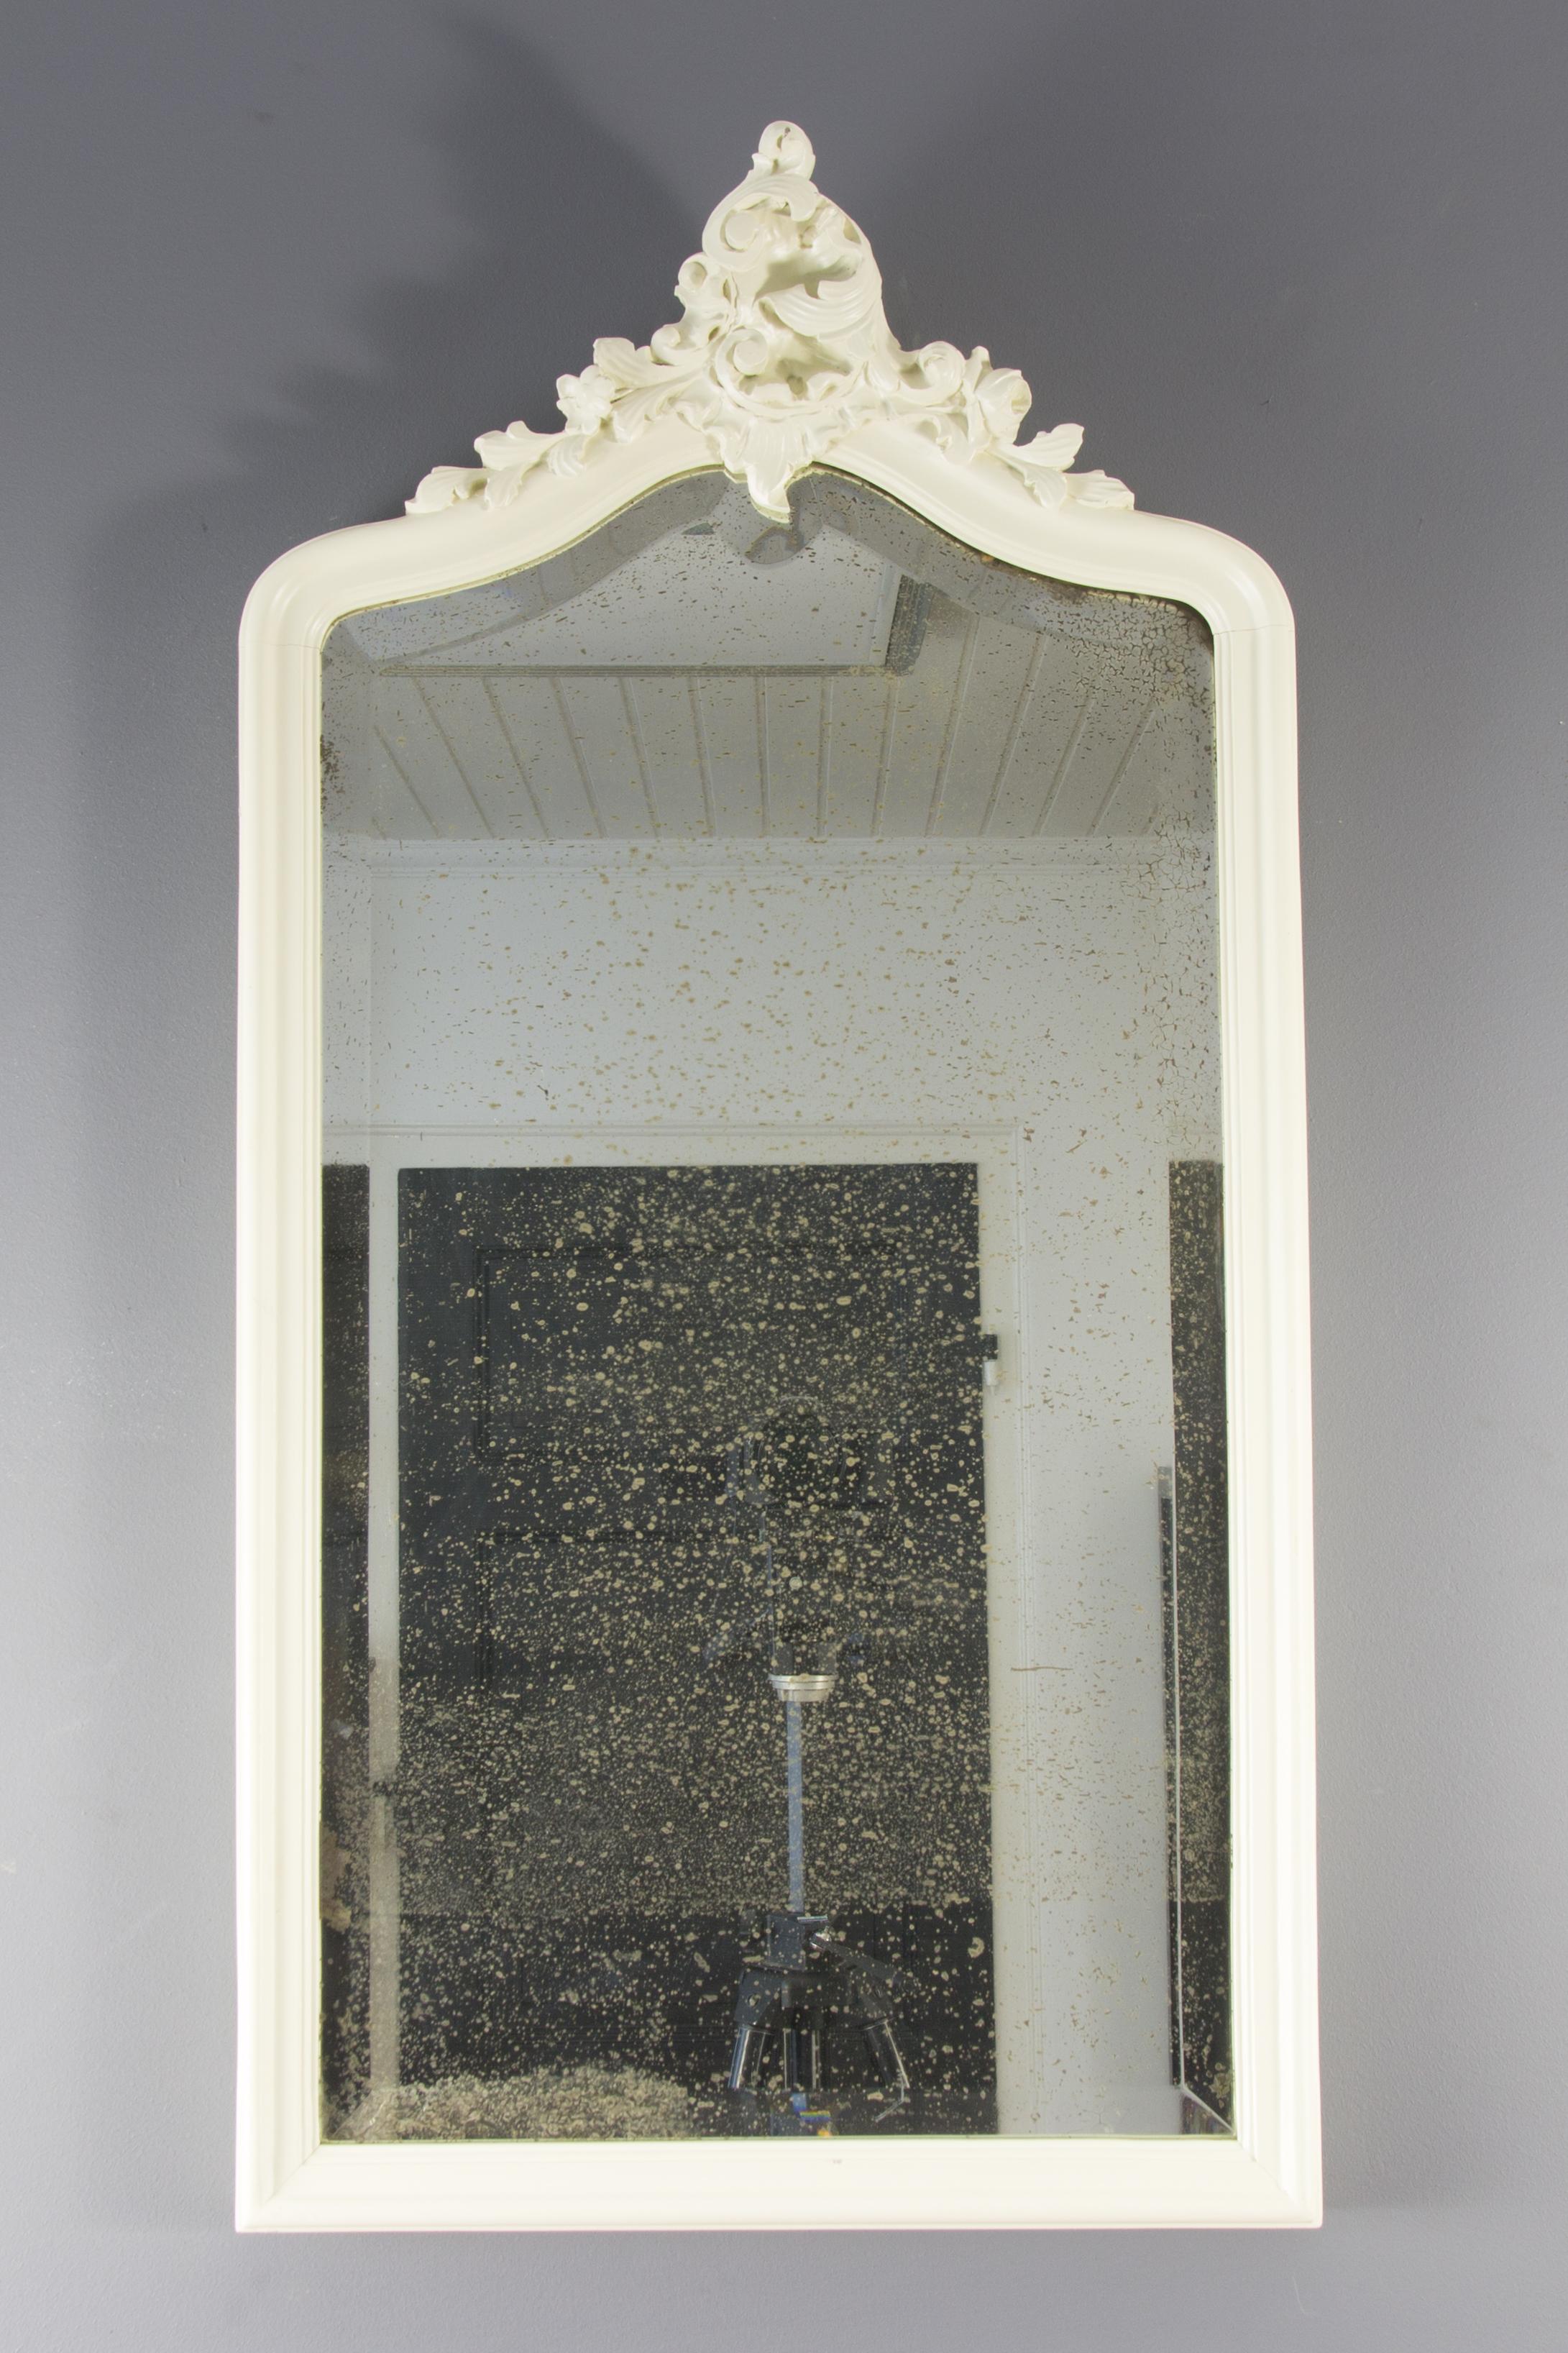 Antique French Rococo style wall mirror with ivory white newly painted oakwood frame with hand carved shell and floral details, beautifully shaped beveled mirror with nice patina.
Dimensions: Height 96 cm / 37.79 in; width 50 cm / 19.68 in; depth 6